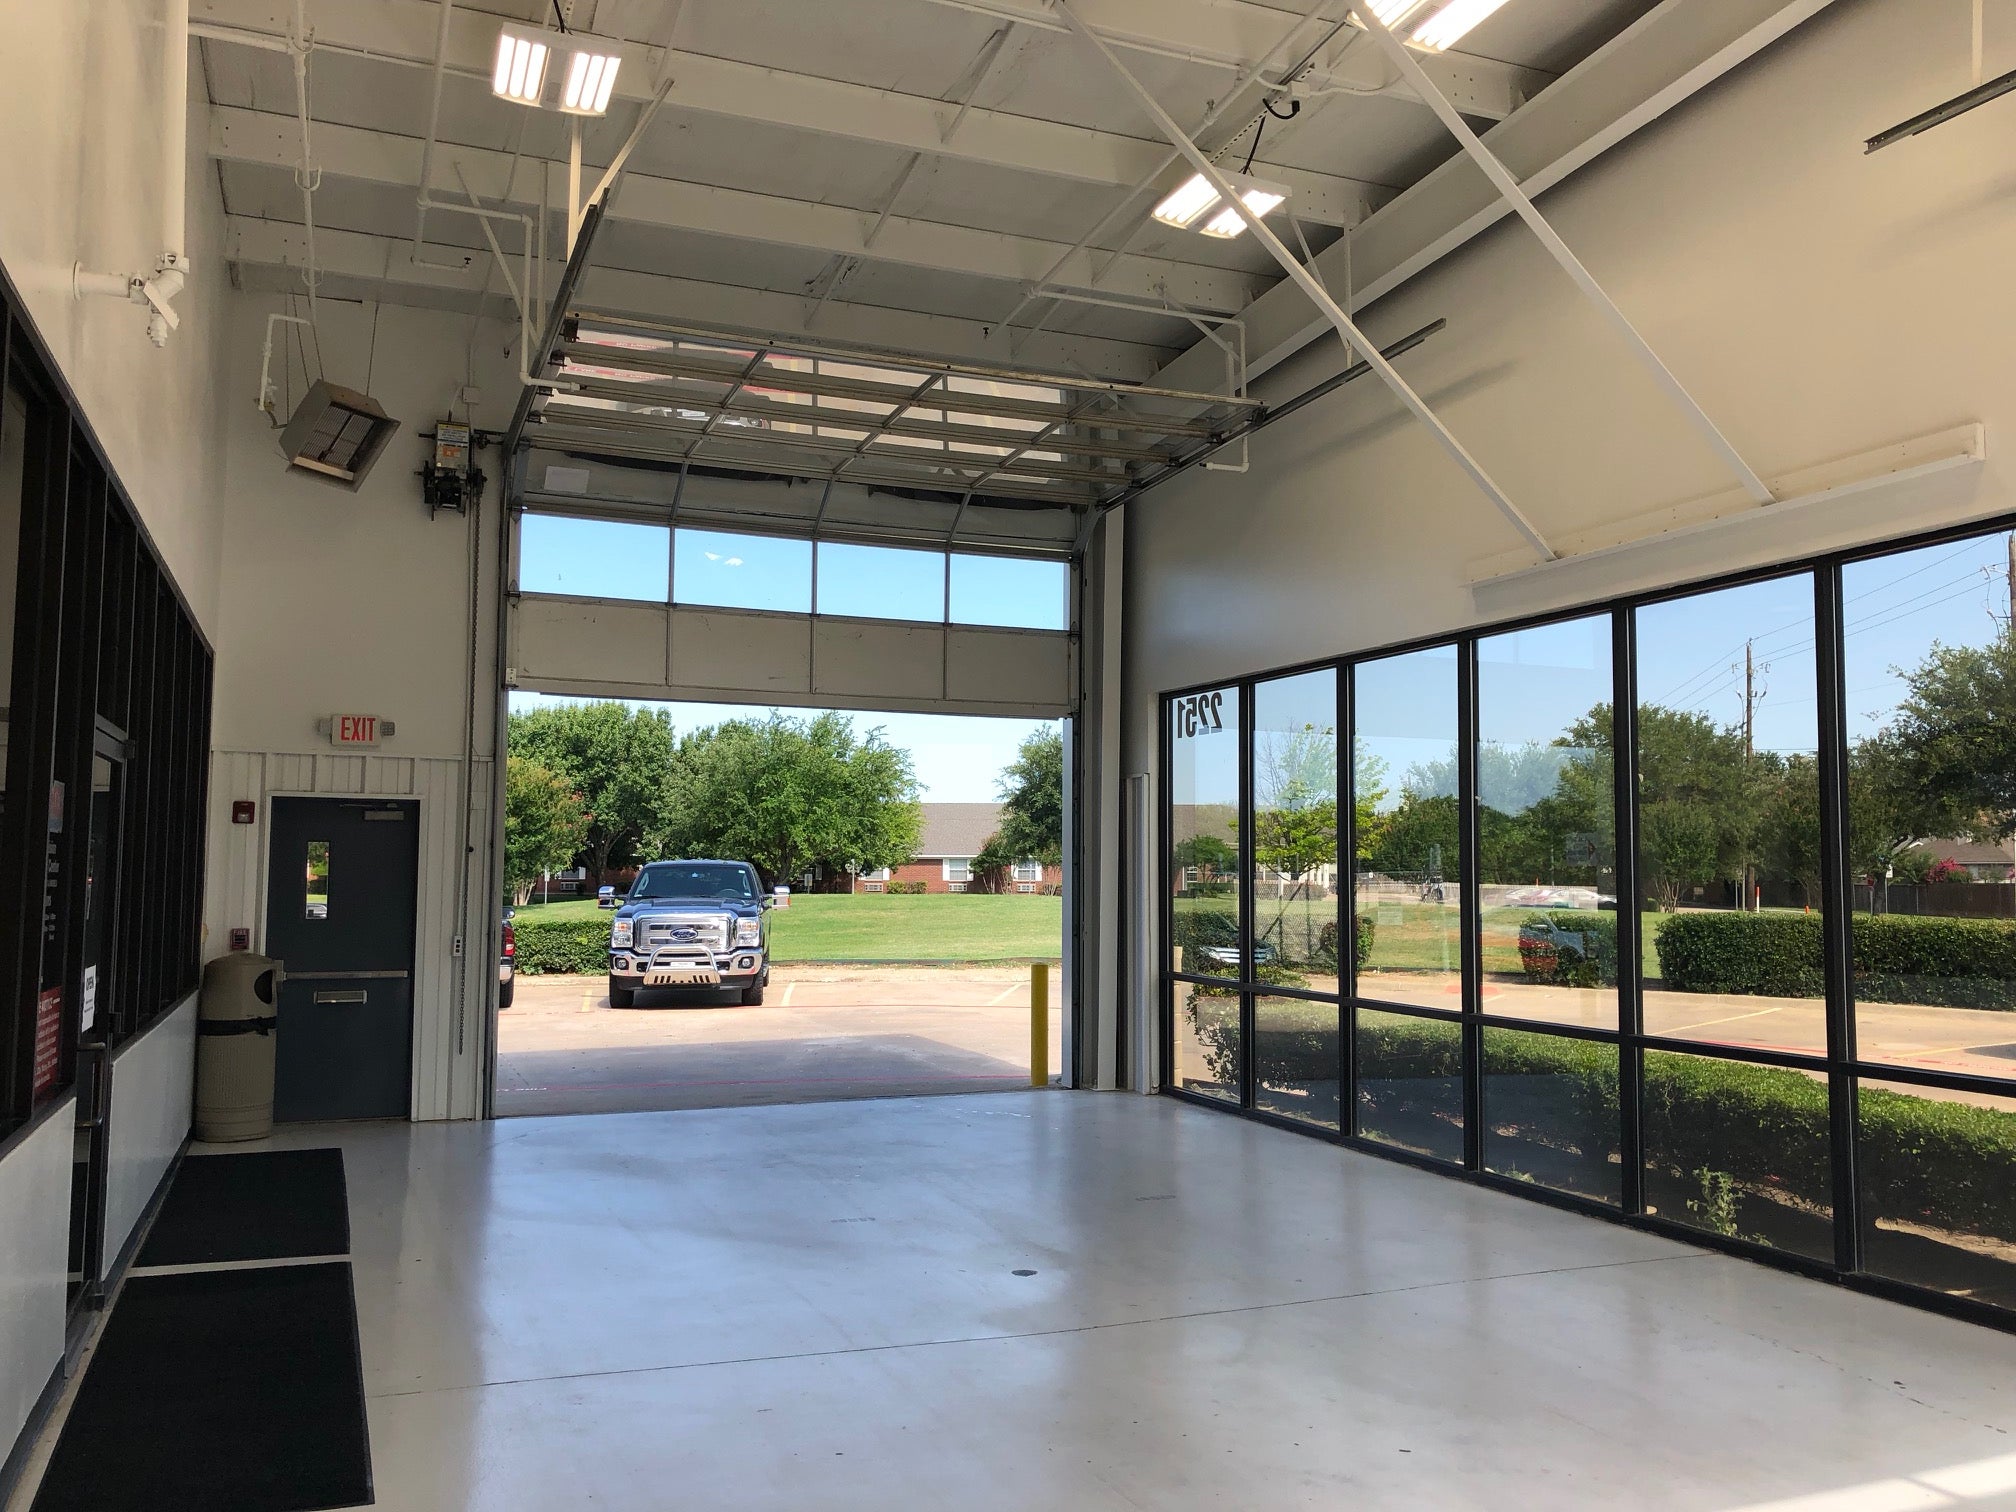 collision Center | Tomes Auto Group in Mckinney TX